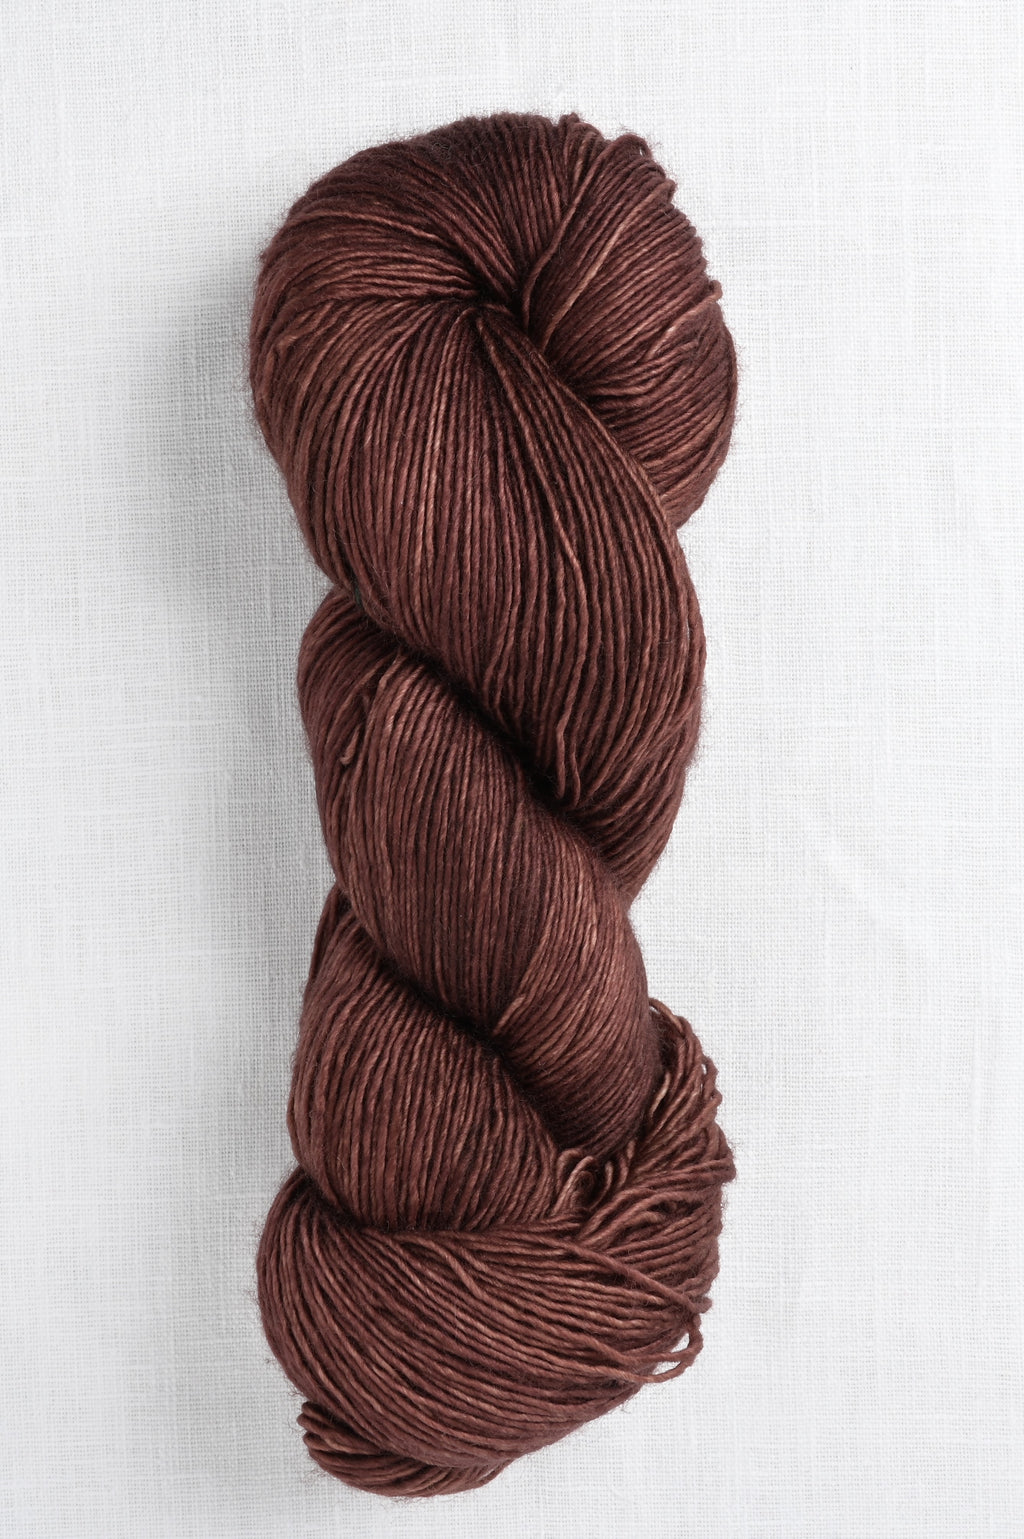 Madelinetosh Wool + Cotton Sinfully Decadent (Core)